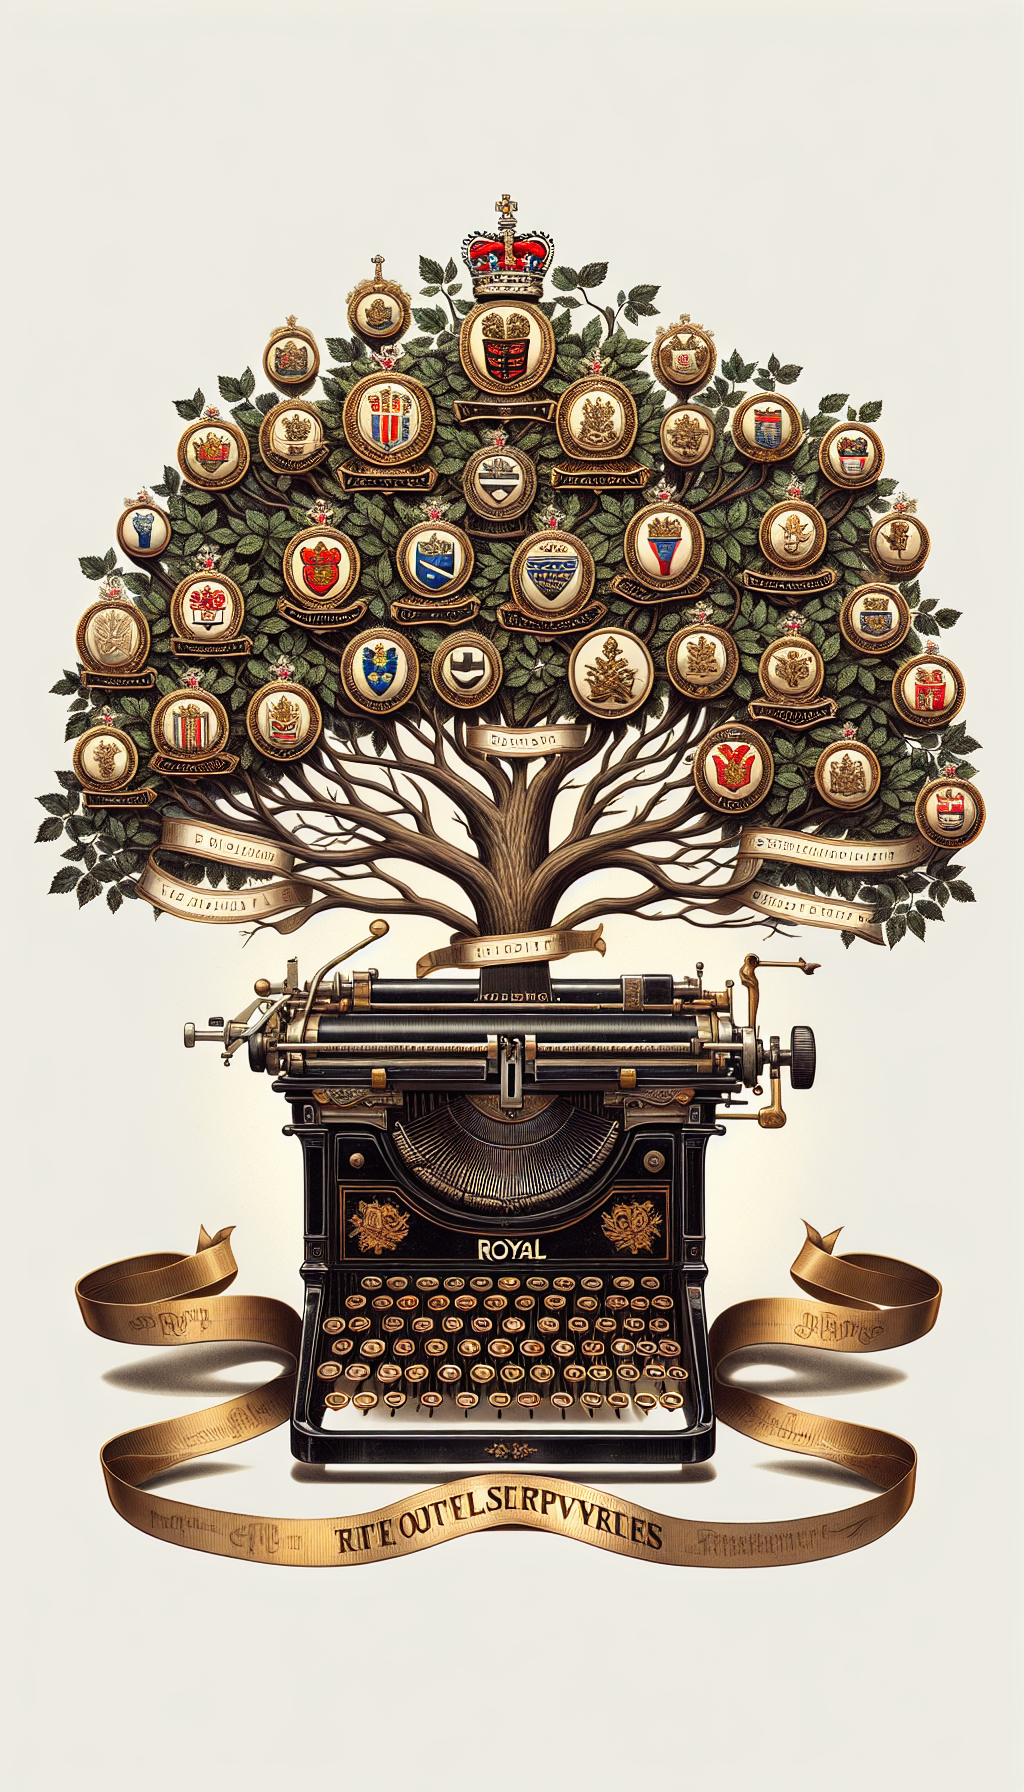 An ornate family tree rooted in a vintage Royal typewriter, with branches reaching upward into regal crests and emblems, each dated with a milestone era of the brand's legacy. Sprinkled throughout the tree are tiny gold coins representing the typewriter's value, while a ribbon banner weaves through the lineage stating significant historical anecdotes in elegant, faded typeface.